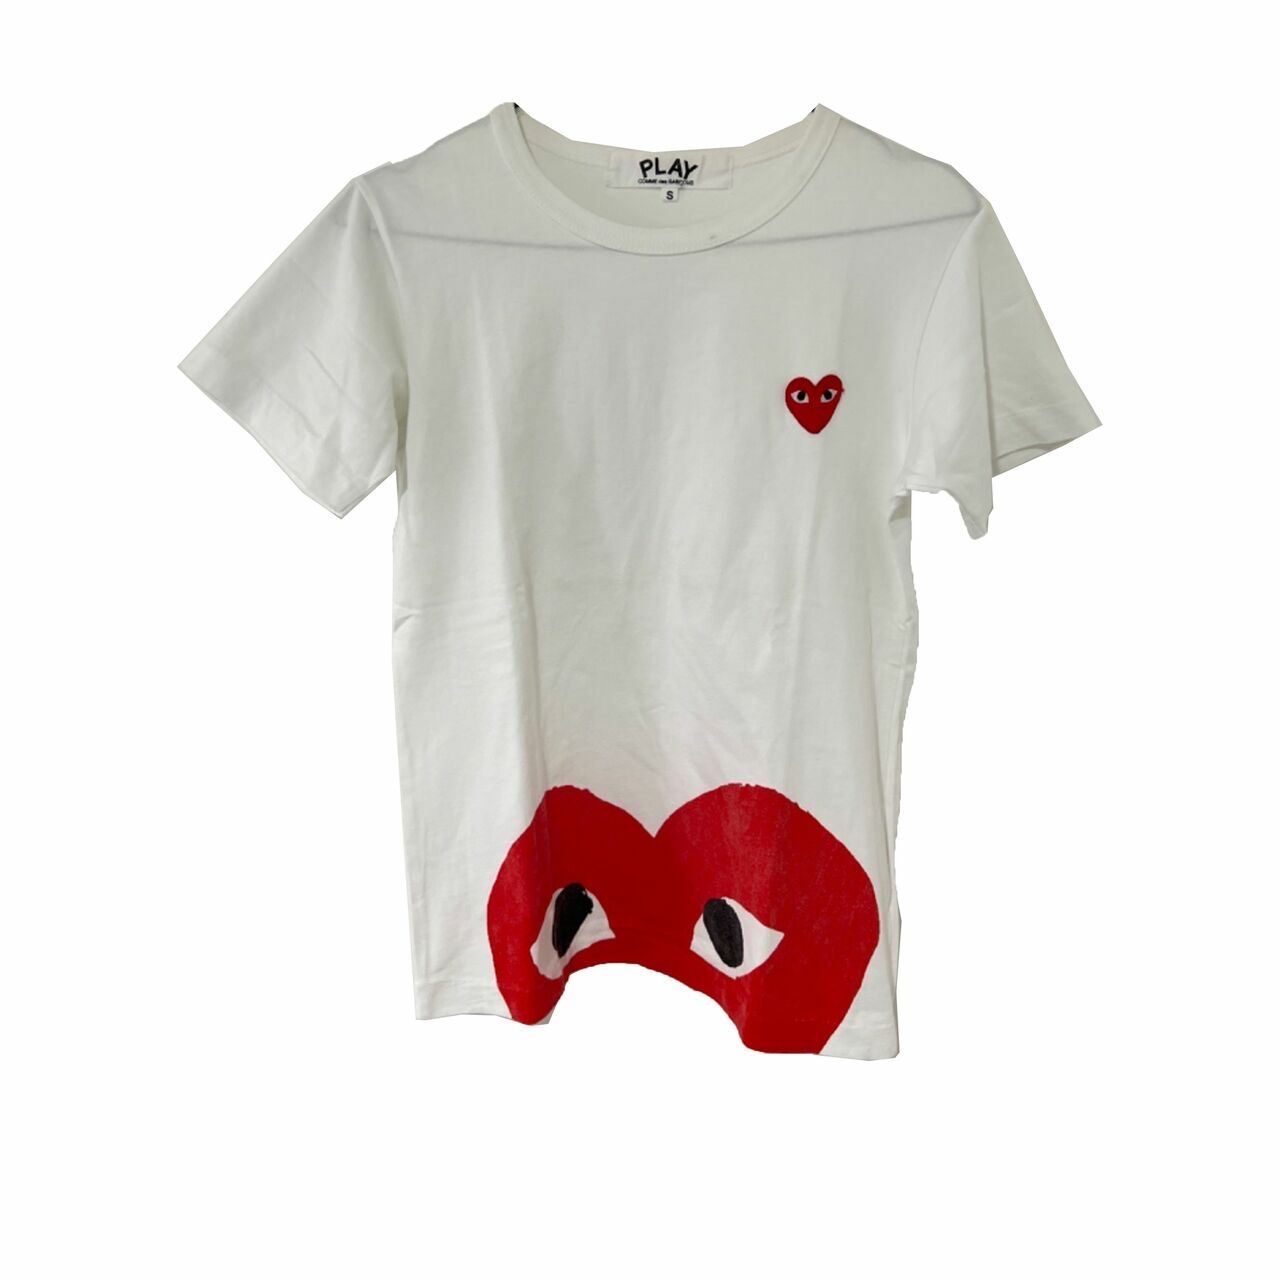 Play By Comme Des Garcons White T-shirt